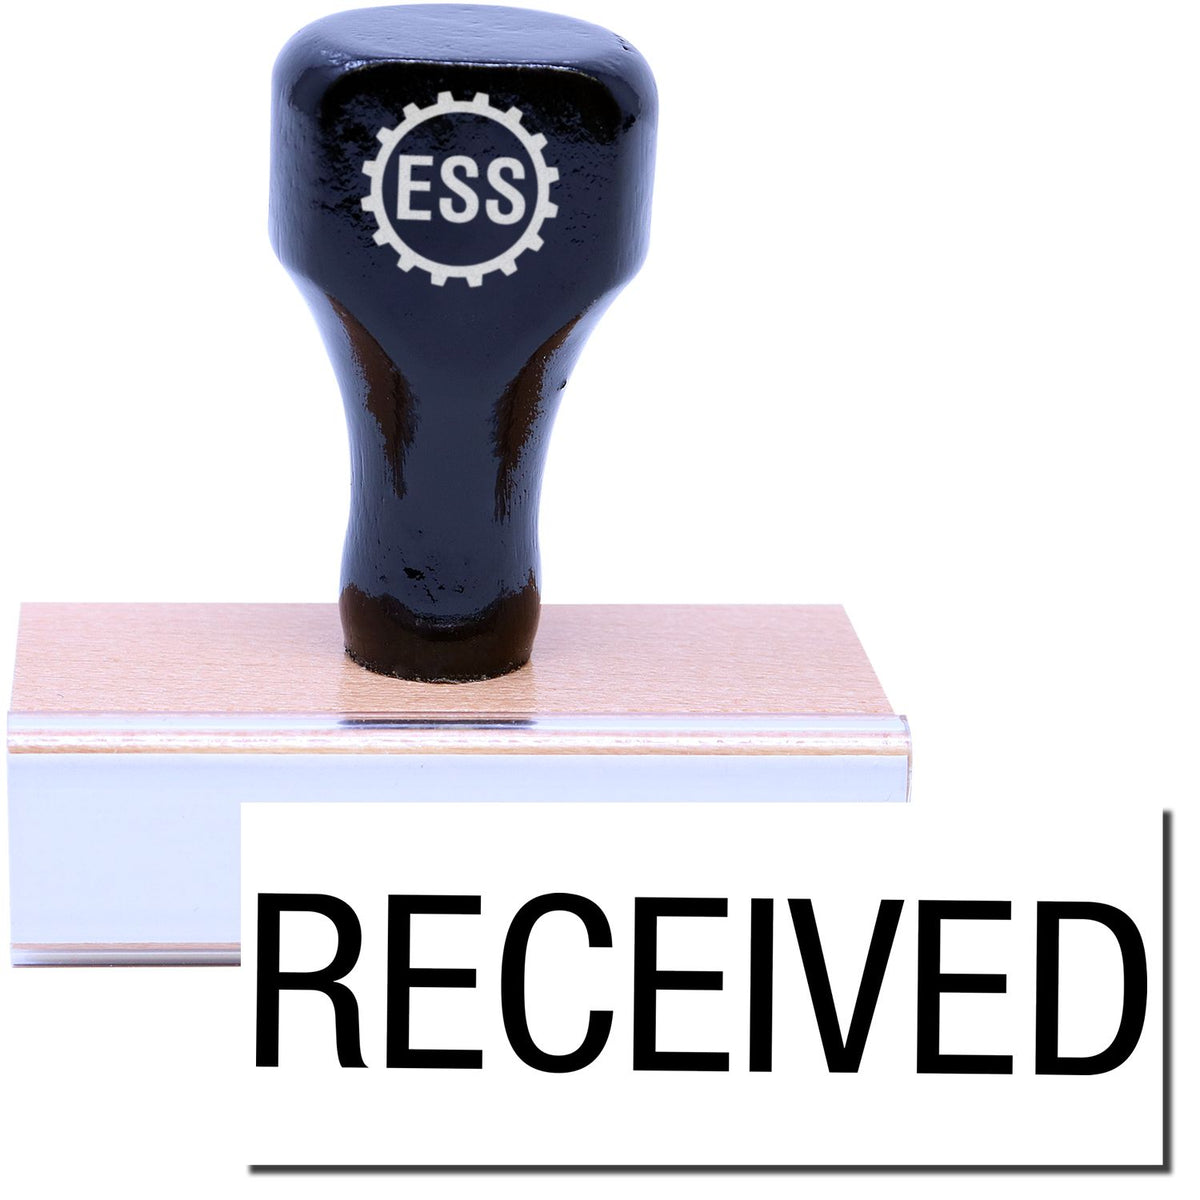 A stock office rubber stamp with a stamped image showing how the text &quot;RECEIVED&quot; in a large font is displayed after stamping.